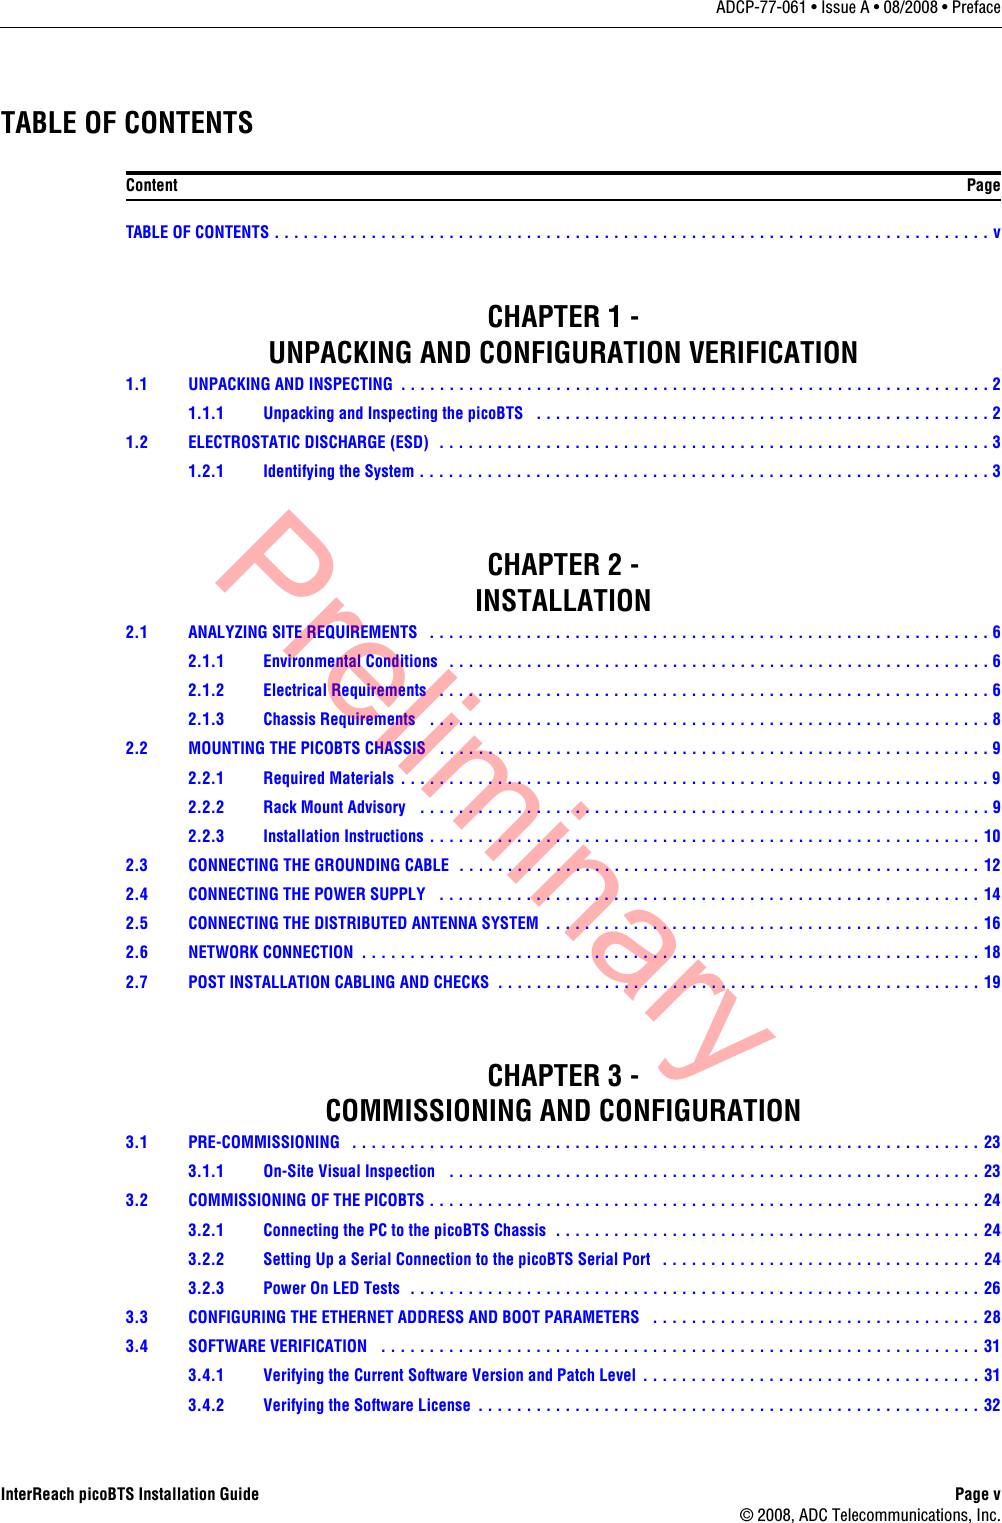 InterReach picoBTS Installation Guide  Page v© 2008, ADC Telecommunications, Inc.ADCP-77-061 • Issue A • 08/2008 • PrefaceTABLE OF CONTENTSTABLE OF CONTENTS . . . . . . . . . . . . . . . . . . . . . . . . . . . . . . . . . . . . . . . . . . . . . . . . . . . . . . . . . . . . . . . . . . . . . . . . . . vCHAPTER 1 - UNPACKING AND CONFIGURATION VERIFICATION1.1  UNPACKING AND INSPECTING  . . . . . . . . . . . . . . . . . . . . . . . . . . . . . . . . . . . . . . . . . . . . . . . . . . . . . . . . . . . . . 21.1.1  Unpacking and Inspecting the picoBTS   . . . . . . . . . . . . . . . . . . . . . . . . . . . . . . . . . . . . . . . . . . . . . . . 21.2  ELECTROSTATIC DISCHARGE (ESD)   . . . . . . . . . . . . . . . . . . . . . . . . . . . . . . . . . . . . . . . . . . . . . . . . . . . . . . . . . 31.2.1  Identifying the System . . . . . . . . . . . . . . . . . . . . . . . . . . . . . . . . . . . . . . . . . . . . . . . . . . . . . . . . . . . 3CHAPTER 2 - INSTALLATION2.1  ANALYZING SITE REQUIREMENTS   . . . . . . . . . . . . . . . . . . . . . . . . . . . . . . . . . . . . . . . . . . . . . . . . . . . . . . . . . . 62.1.1 Environmental Conditions   . . . . . . . . . . . . . . . . . . . . . . . . . . . . . . . . . . . . . . . . . . . . . . . . . . . . . . . . 62.1.2  Electrical Requirements   . . . . . . . . . . . . . . . . . . . . . . . . . . . . . . . . . . . . . . . . . . . . . . . . . . . . . . . . . 62.1.3  Chassis Requirements   . . . . . . . . . . . . . . . . . . . . . . . . . . . . . . . . . . . . . . . . . . . . . . . . . . . . . . . . . . 82.2  MOUNTING THE PICOBTS CHASSIS   . . . . . . . . . . . . . . . . . . . . . . . . . . . . . . . . . . . . . . . . . . . . . . . . . . . . . . . . . 92.2.1  Required Materials  . . . . . . . . . . . . . . . . . . . . . . . . . . . . . . . . . . . . . . . . . . . . . . . . . . . . . . . . . . . . . 92.2.2  Rack Mount Advisory   . . . . . . . . . . . . . . . . . . . . . . . . . . . . . . . . . . . . . . . . . . . . . . . . . . . . . . . . . . . 92.2.3  Installation Instructions . . . . . . . . . . . . . . . . . . . . . . . . . . . . . . . . . . . . . . . . . . . . . . . . . . . . . . . . . 102.3  CONNECTING THE GROUNDING CABLE  . . . . . . . . . . . . . . . . . . . . . . . . . . . . . . . . . . . . . . . . . . . . . . . . . . . . . . 122.4  CONNECTING THE POWER SUPPLY   . . . . . . . . . . . . . . . . . . . . . . . . . . . . . . . . . . . . . . . . . . . . . . . . . . . . . . . . 142.5  CONNECTING THE DISTRIBUTED ANTENNA SYSTEM  . . . . . . . . . . . . . . . . . . . . . . . . . . . . . . . . . . . . . . . . . . . . . 162.6  NETWORK CONNECTION  . . . . . . . . . . . . . . . . . . . . . . . . . . . . . . . . . . . . . . . . . . . . . . . . . . . . . . . . . . . . . . . . 182.7  POST INSTALLATION CABLING AND CHECKS  . . . . . . . . . . . . . . . . . . . . . . . . . . . . . . . . . . . . . . . . . . . . . . . . . . 19CHAPTER 3 - COMMISSIONING AND CONFIGURATION3.1  PRE-COMMISSIONING   . . . . . . . . . . . . . . . . . . . . . . . . . . . . . . . . . . . . . . . . . . . . . . . . . . . . . . . . . . . . . . . . . 233.1.1  On-Site Visual Inspection   . . . . . . . . . . . . . . . . . . . . . . . . . . . . . . . . . . . . . . . . . . . . . . . . . . . . . . . 233.2  COMMISSIONING OF THE PICOBTS . . . . . . . . . . . . . . . . . . . . . . . . . . . . . . . . . . . . . . . . . . . . . . . . . . . . . . . . . 243.2.1  Connecting the PC to the picoBTS Chassis  . . . . . . . . . . . . . . . . . . . . . . . . . . . . . . . . . . . . . . . . . . . . 243.2.2  Setting Up a Serial Connection to the picoBTS Serial Port   . . . . . . . . . . . . . . . . . . . . . . . . . . . . . . . . . 243.2.3  Power On LED Tests   . . . . . . . . . . . . . . . . . . . . . . . . . . . . . . . . . . . . . . . . . . . . . . . . . . . . . . . . . . . 263.3  CONFIGURING THE ETHERNET ADDRESS AND BOOT PARAMETERS   . . . . . . . . . . . . . . . . . . . . . . . . . . . . . . . . . . 283.4  SOFTWARE VERIFICATION   . . . . . . . . . . . . . . . . . . . . . . . . . . . . . . . . . . . . . . . . . . . . . . . . . . . . . . . . . . . . . . 313.4.1  Verifying the Current Software Version and Patch Level  . . . . . . . . . . . . . . . . . . . . . . . . . . . . . . . . . . . 313.4.2  Verifying the Software License  . . . . . . . . . . . . . . . . . . . . . . . . . . . . . . . . . . . . . . . . . . . . . . . . . . . . 32Content PagePreliminary